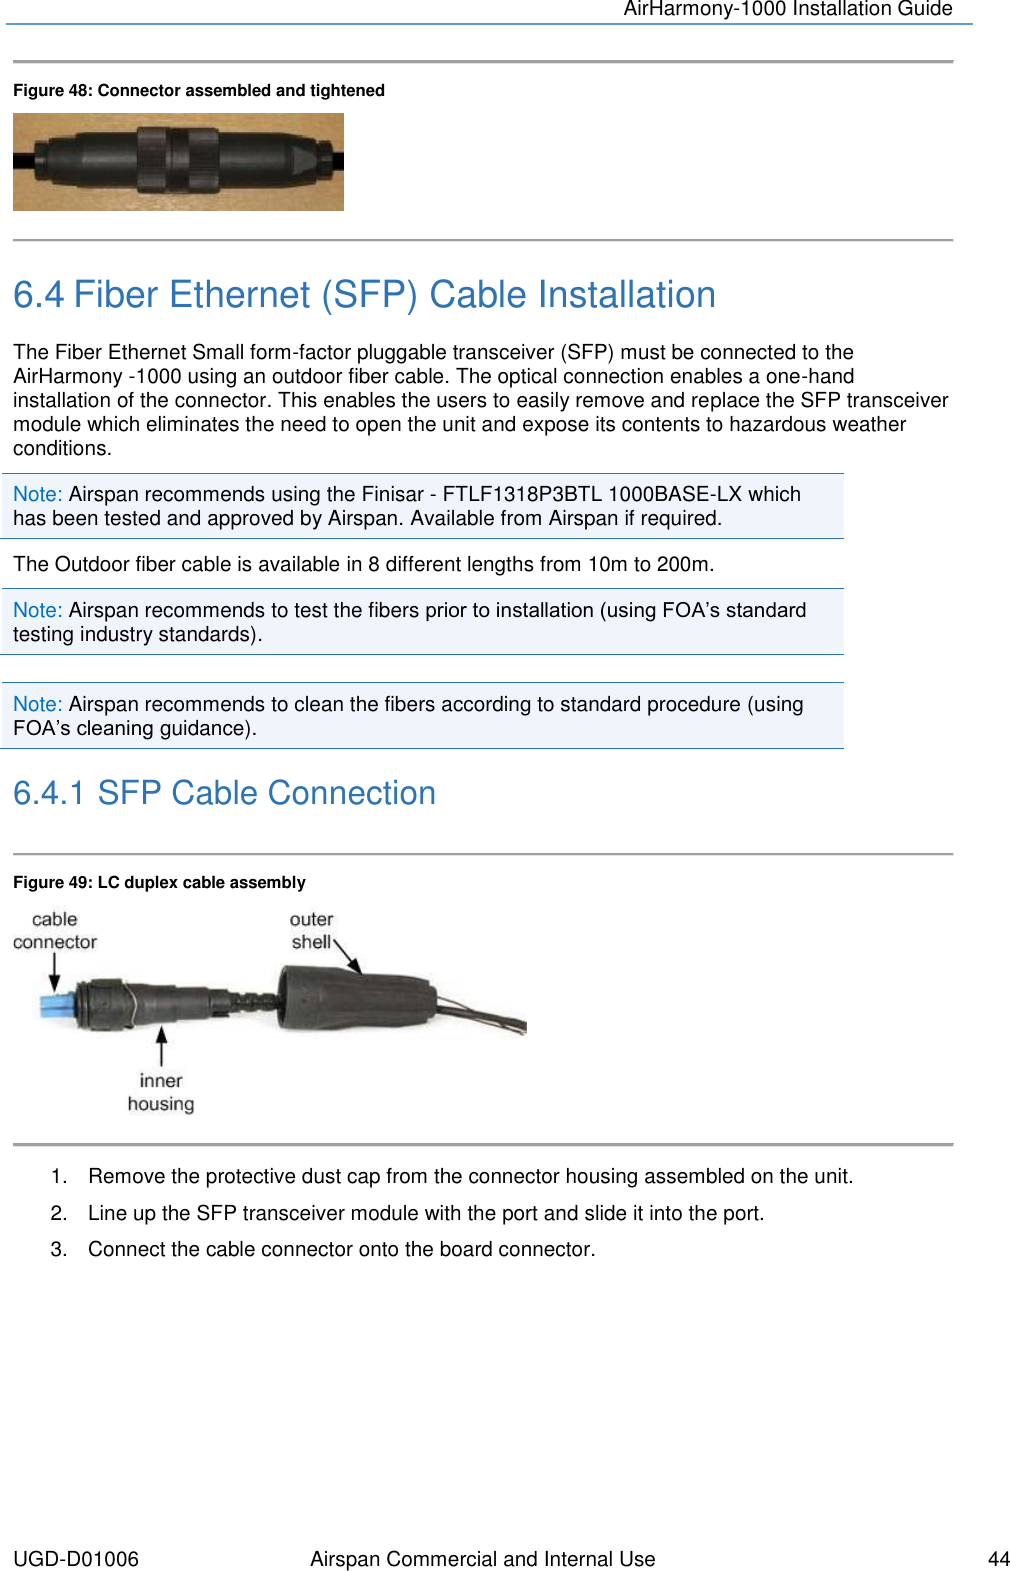 AirHarmony-1000 Installation Guide  UGD-D01006 Airspan Commercial and Internal Use    44   Figure 48: Connector assembled and tightened   6.4 Fiber Ethernet (SFP) Cable Installation The Fiber Ethernet Small form-factor pluggable transceiver (SFP) must be connected to the AirHarmony -1000 using an outdoor fiber cable. The optical connection enables a one-hand installation of the connector. This enables the users to easily remove and replace the SFP transceiver module which eliminates the need to open the unit and expose its contents to hazardous weather conditions. Note: Airspan recommends using the Finisar - FTLF1318P3BTL 1000BASE-LX which has been tested and approved by Airspan. Available from Airspan if required. The Outdoor fiber cable is available in 8 different lengths from 10m to 200m. Note: Airspan recommends to test the fibers prior to installation (using FOA’s standard testing industry standards).  Note: Airspan recommends to clean the fibers according to standard procedure (using FOA’s cleaning guidance). 6.4.1 SFP Cable Connection  Figure 49: LC duplex cable assembly   1.  Remove the protective dust cap from the connector housing assembled on the unit. 2.  Line up the SFP transceiver module with the port and slide it into the port. 3.  Connect the cable connector onto the board connector.    